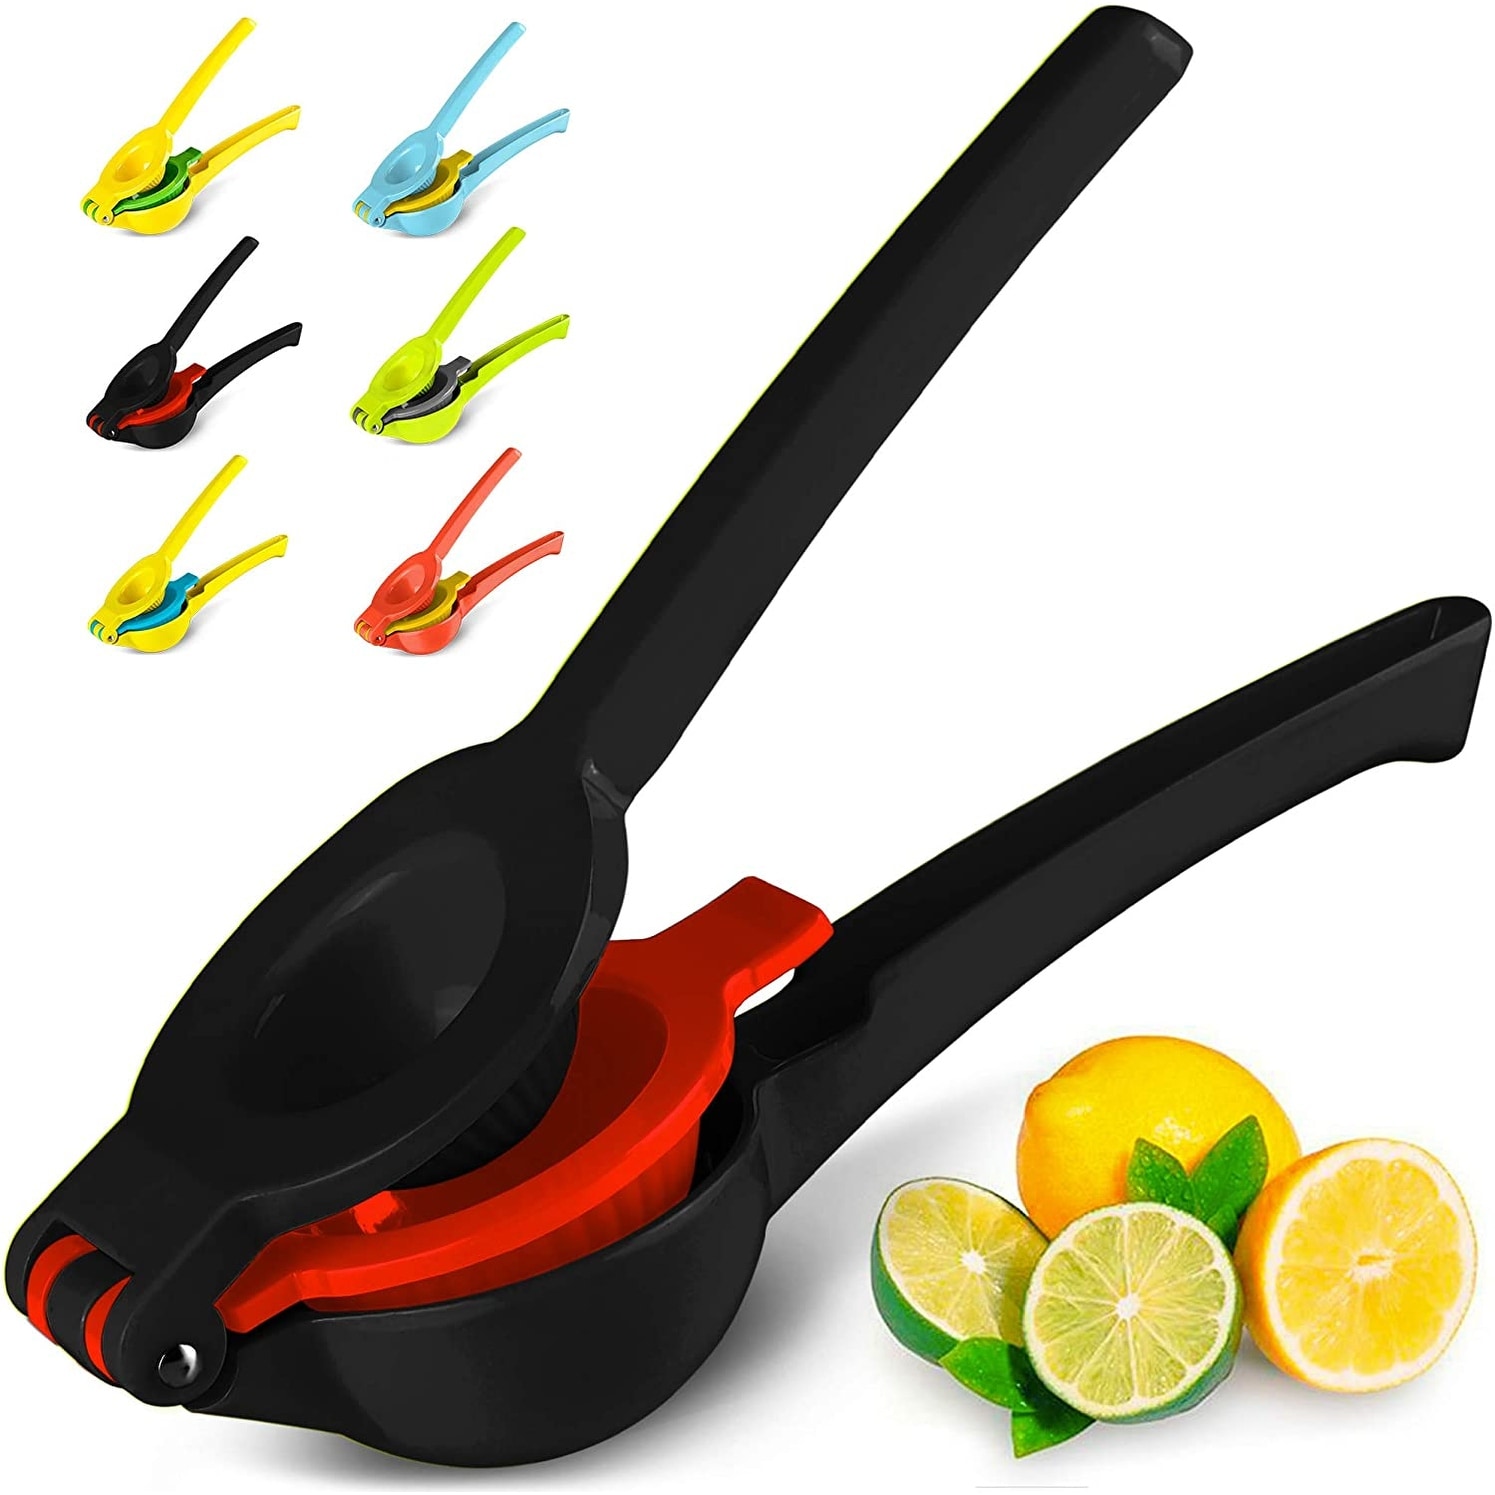 https://ak1.ostkcdn.com/images/products/is/images/direct/37aa4de8e90a991f8e52dd82a2b494fcada9b554/Zulay-Kitchen-Metal-Lemon-Lime-Squeezer---Black-Red.jpg